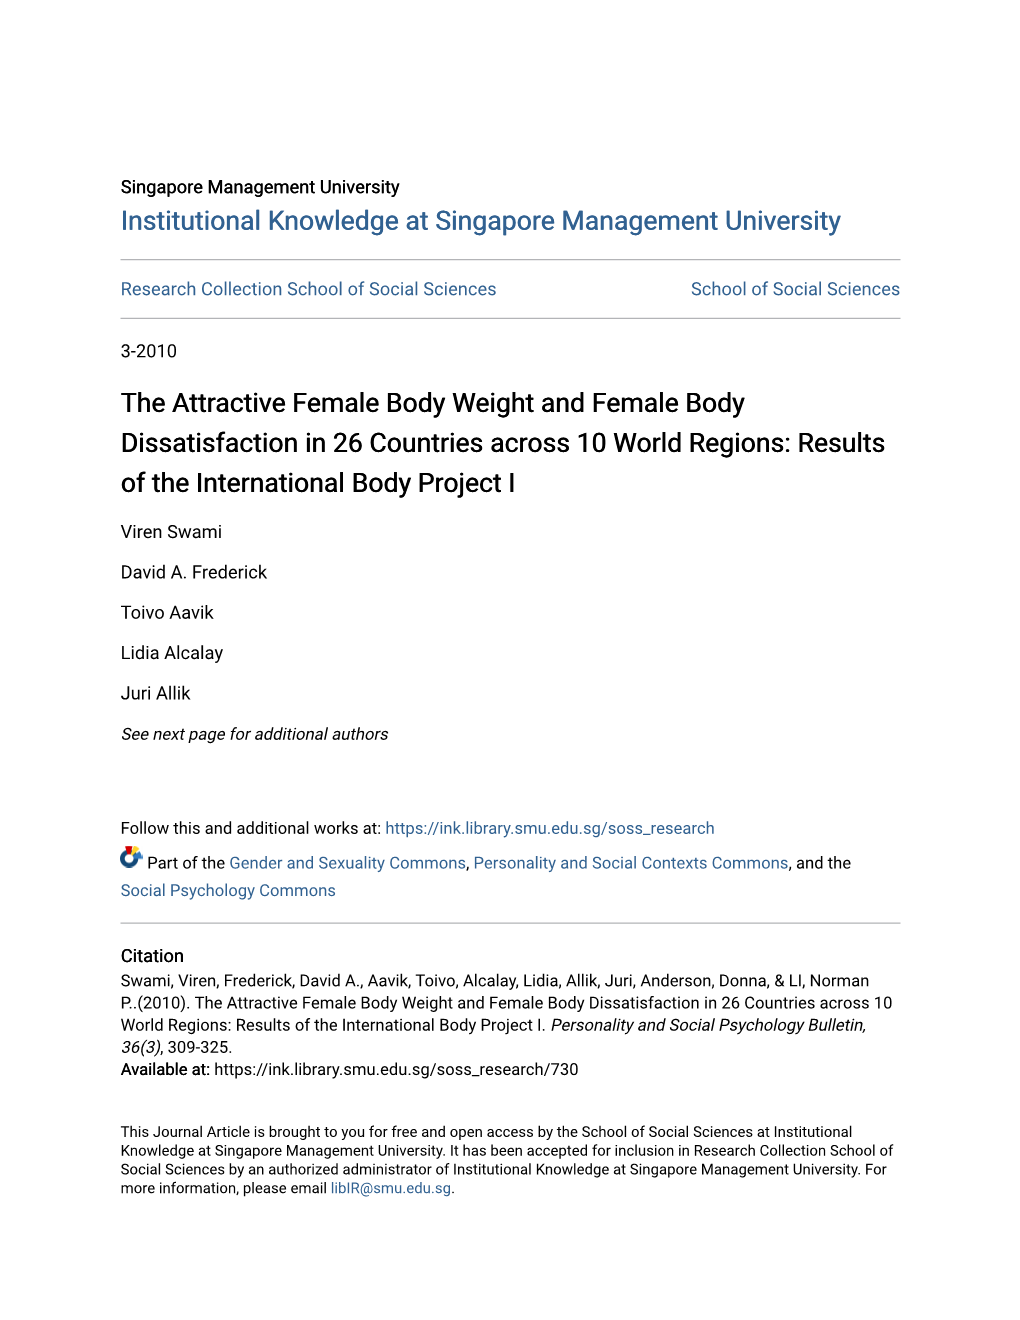 Results of the International Body Project I